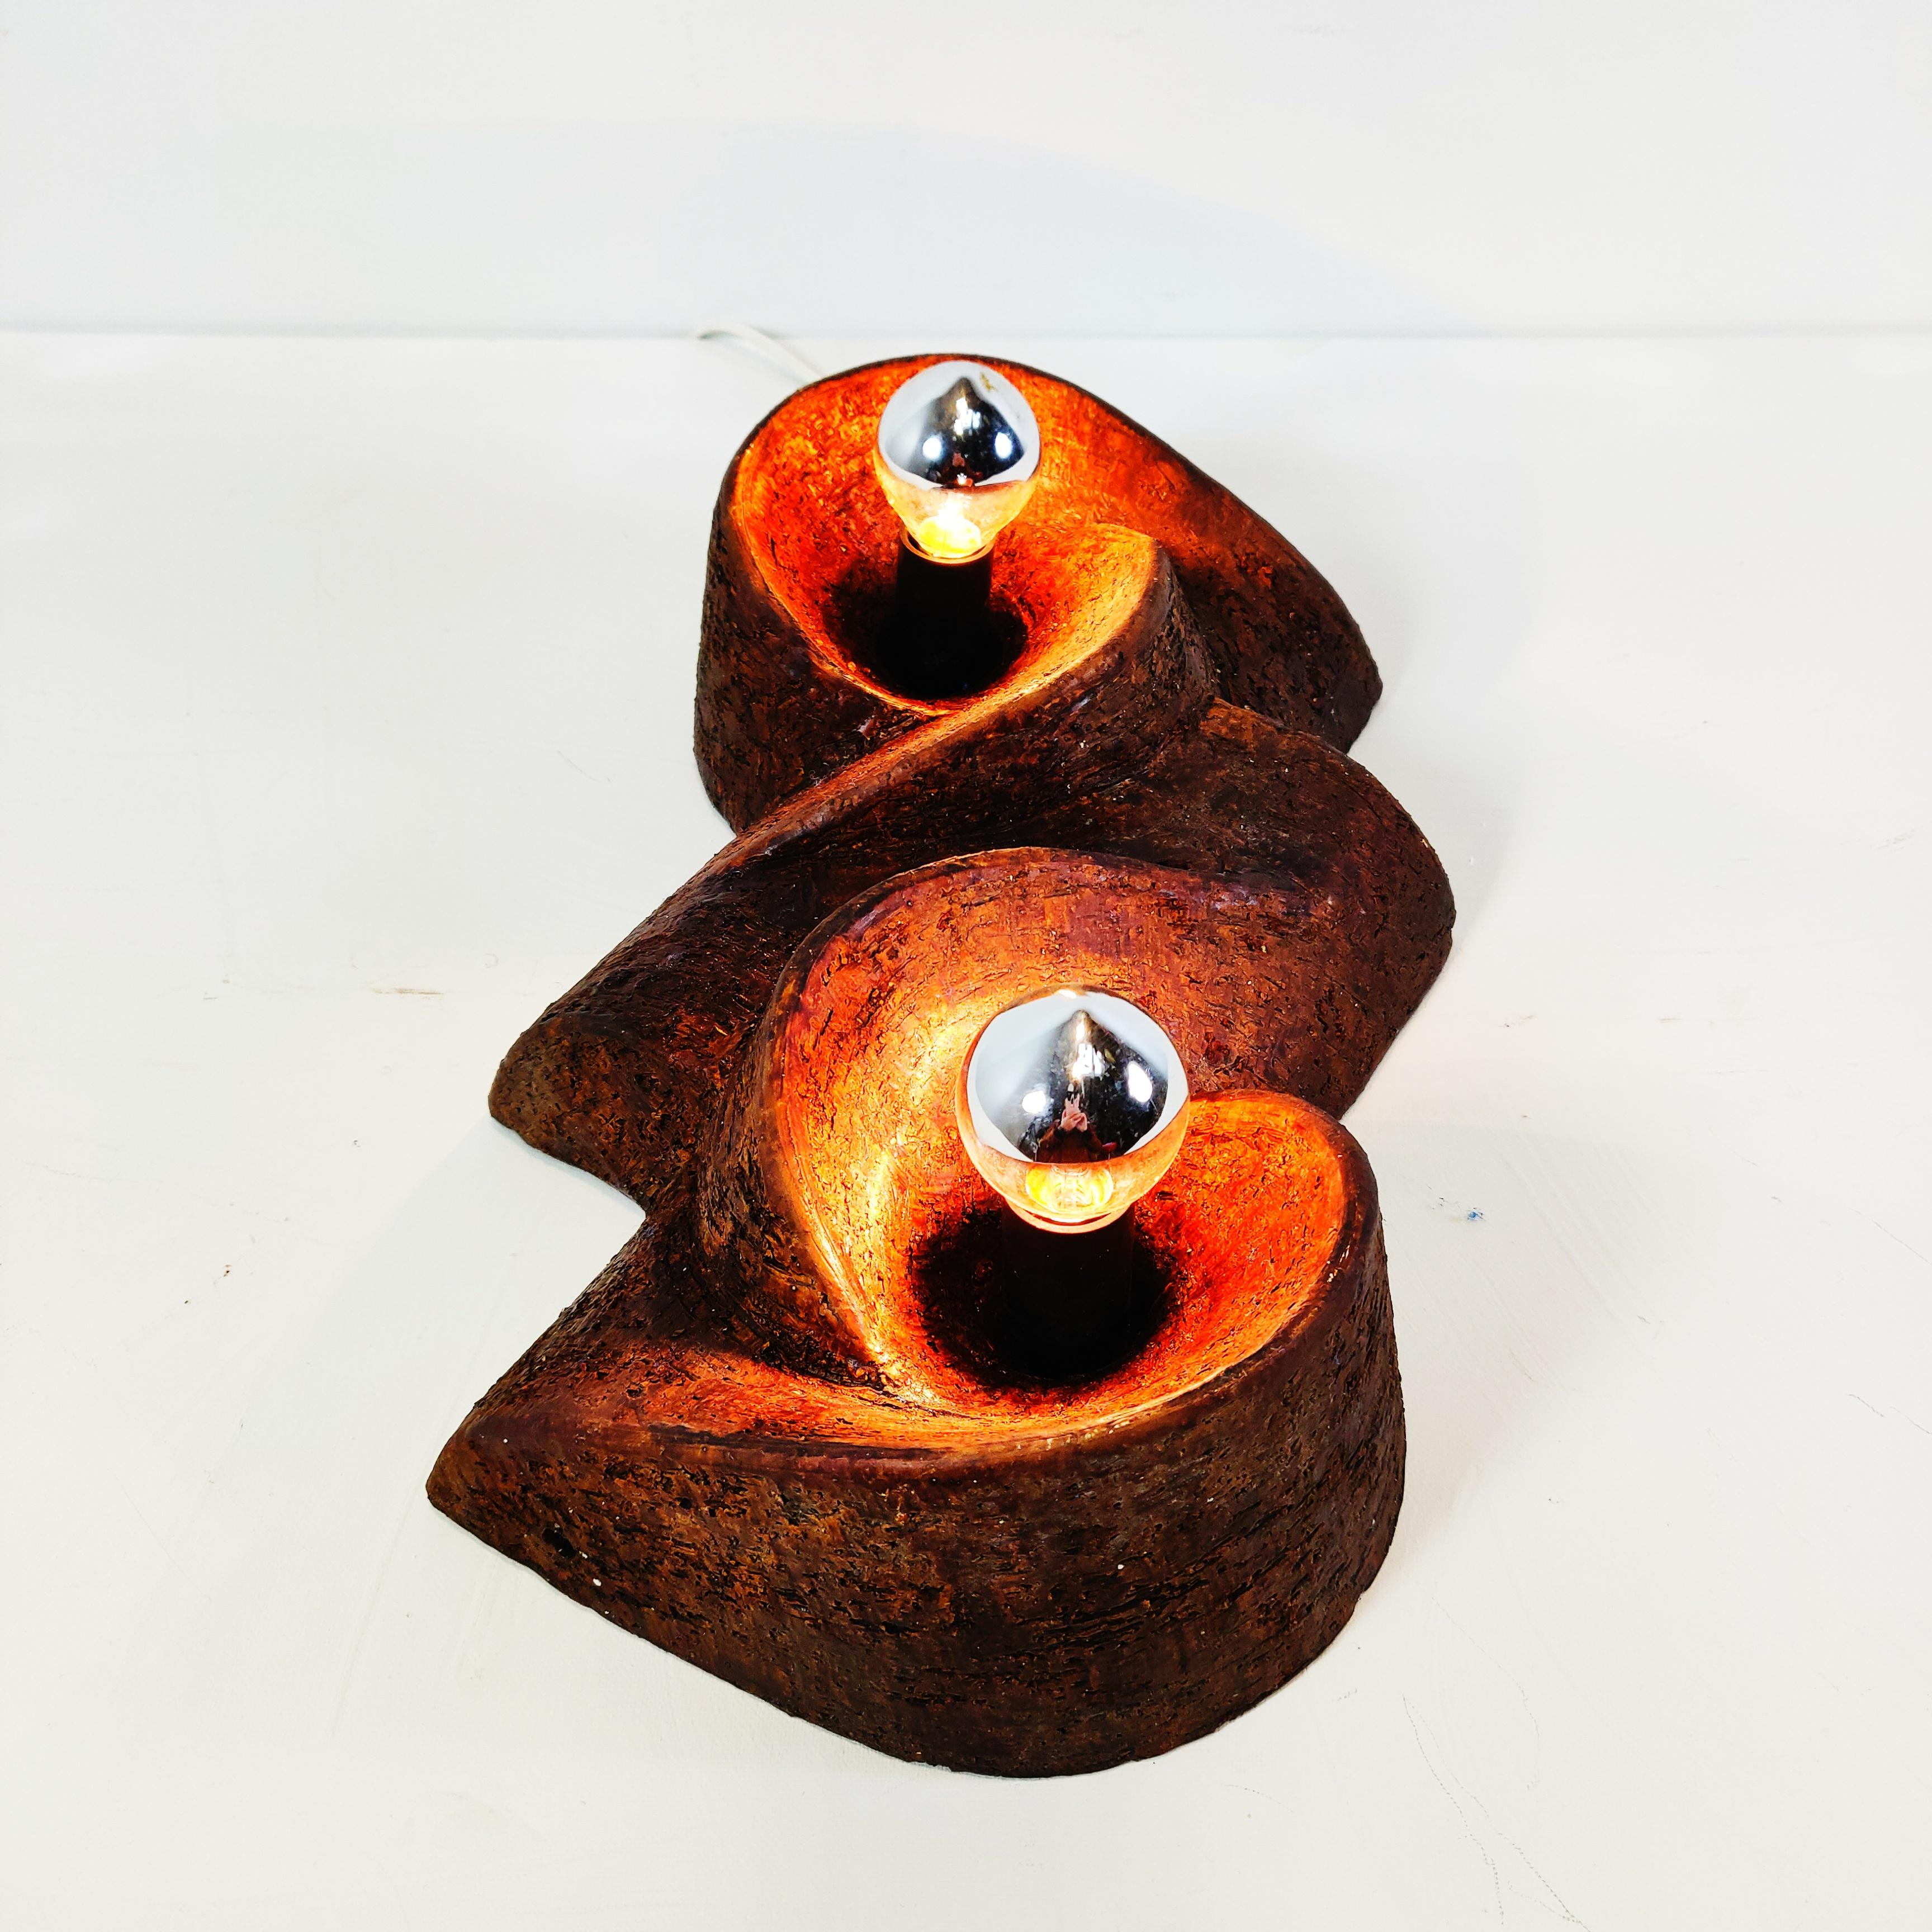 This mid century ceramic wall lamp in a abstract organic fat lava design is made in the 60s. Its wonderful to see the light and shadow come together.
Its also possible to use the lamp as a table lamp

The lamp needs two E14 lightbulbs